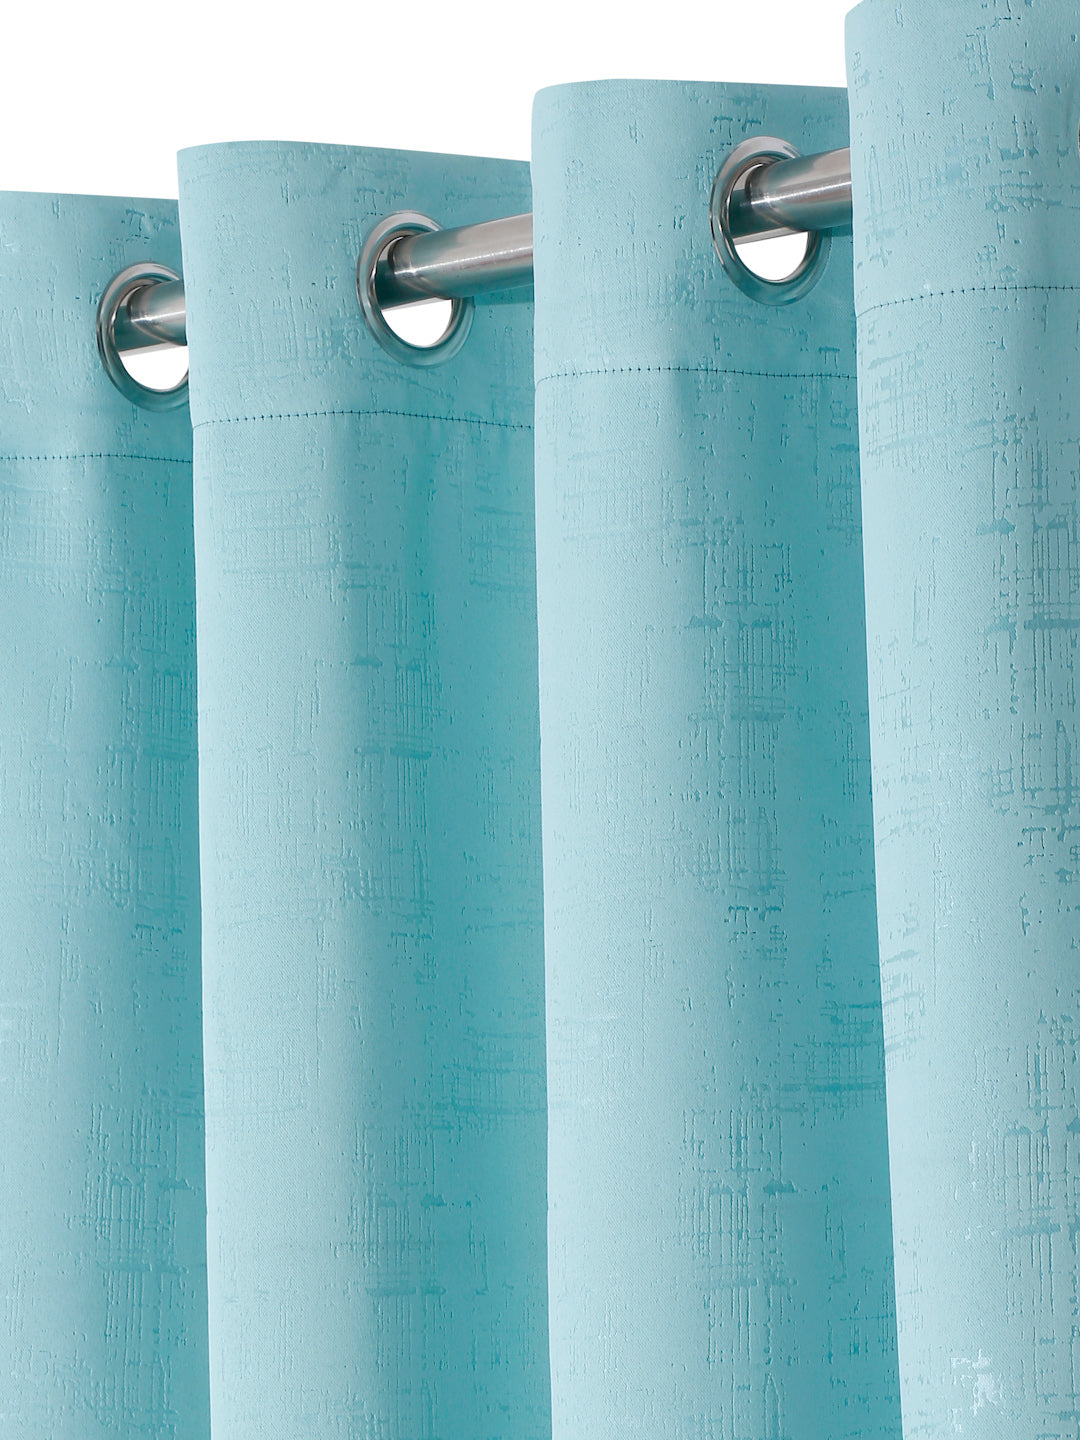 Pack of 2 Polyester Blackout Emboss Long Door Curtains- Sky Blue